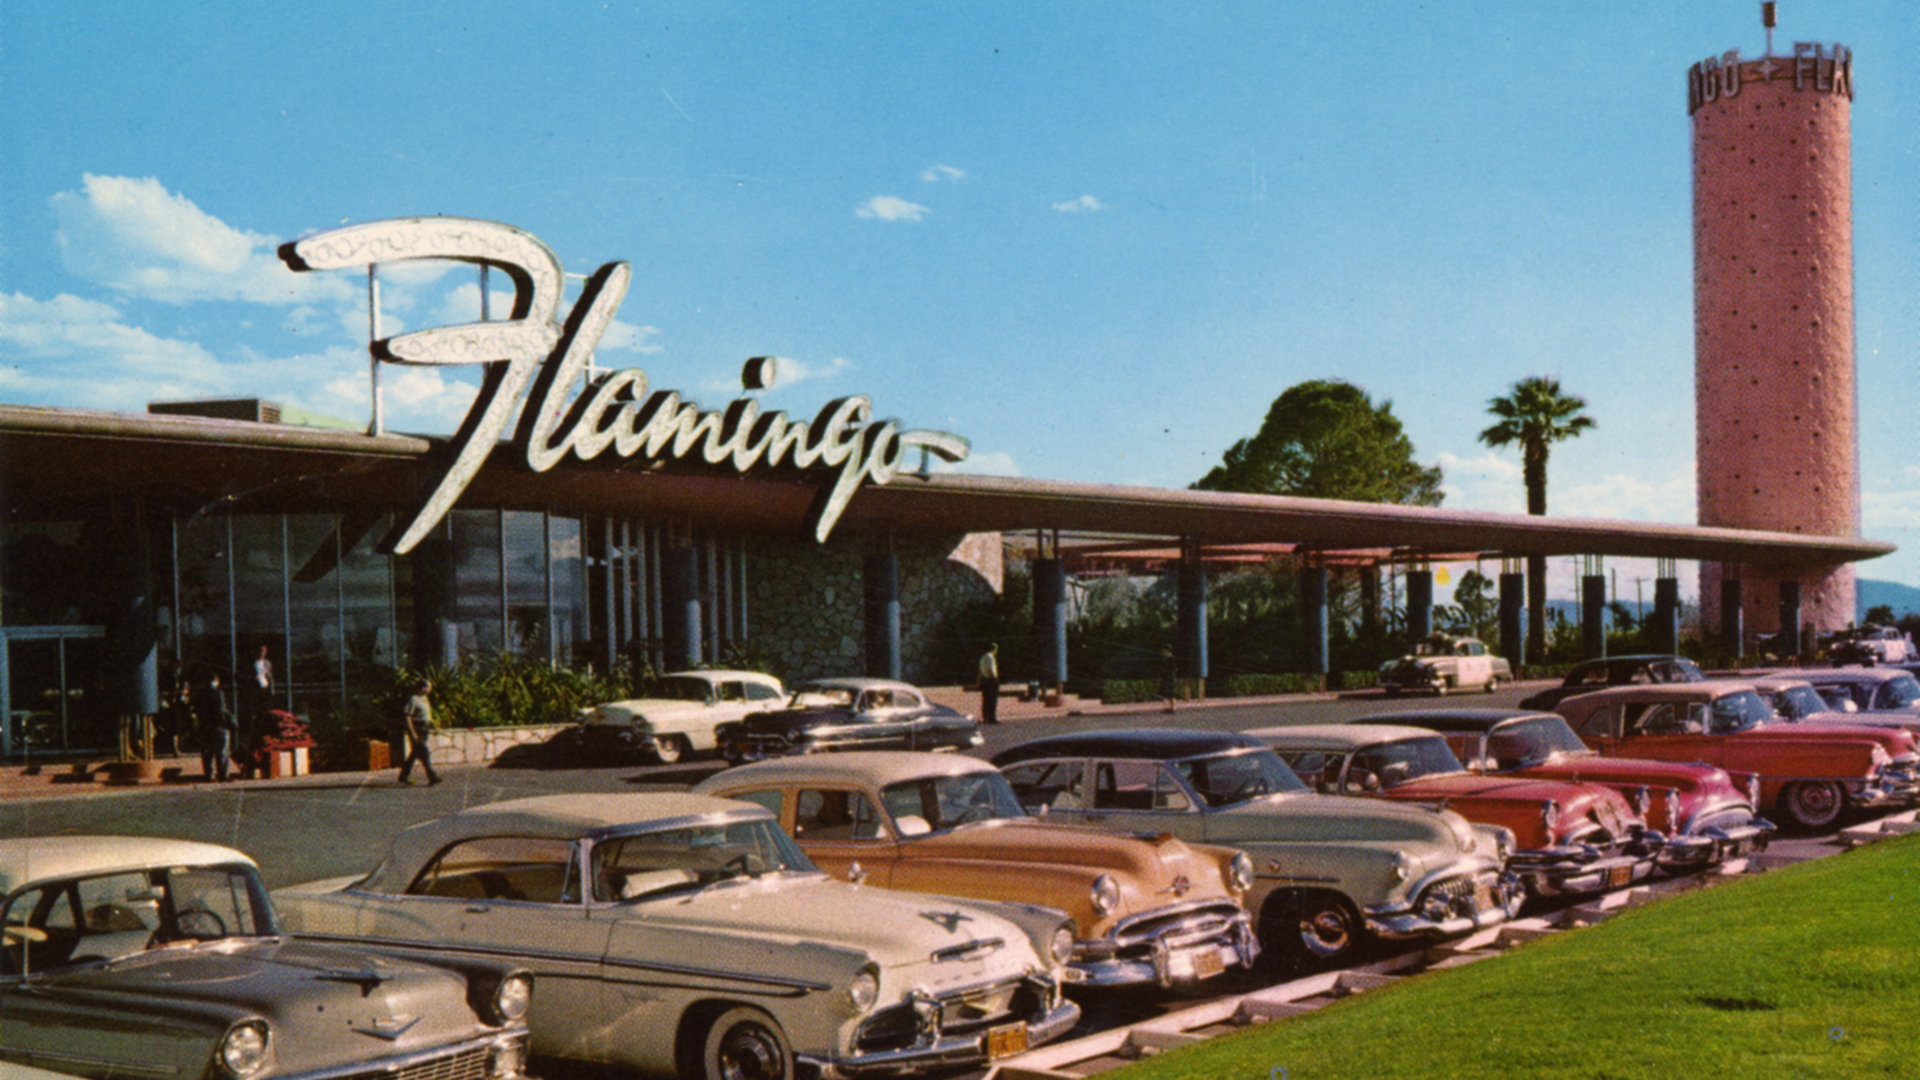 The Flamingo—A Hotel Built by Bugsy Siegel - The Unofficial Guides